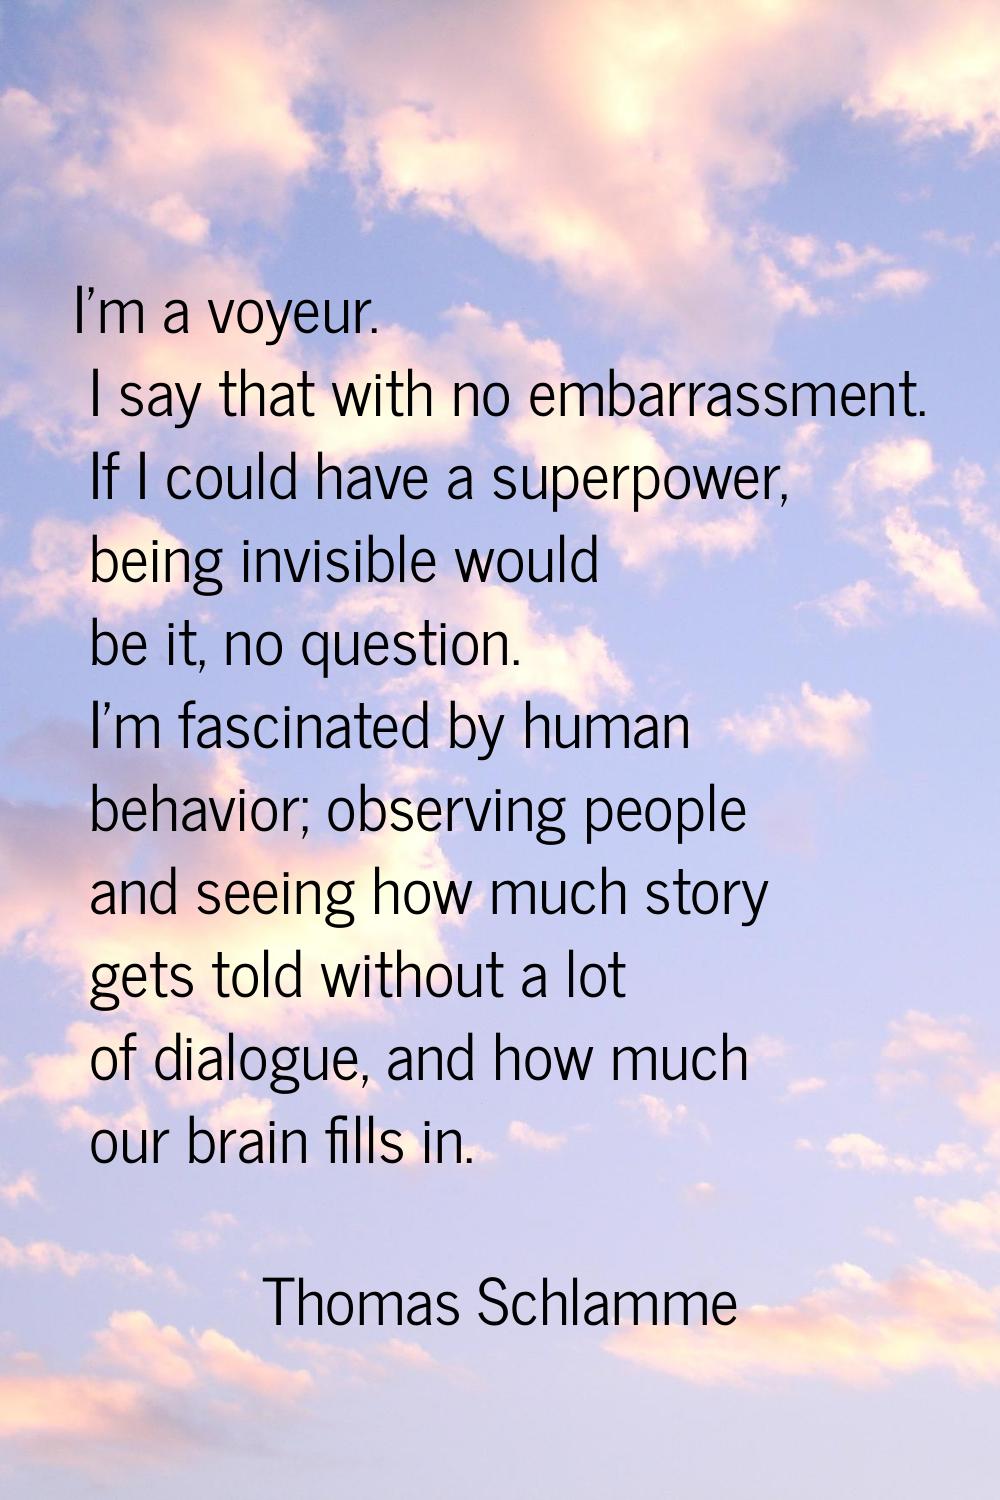 I'm a voyeur. I say that with no embarrassment. If I could have a superpower, being invisible would